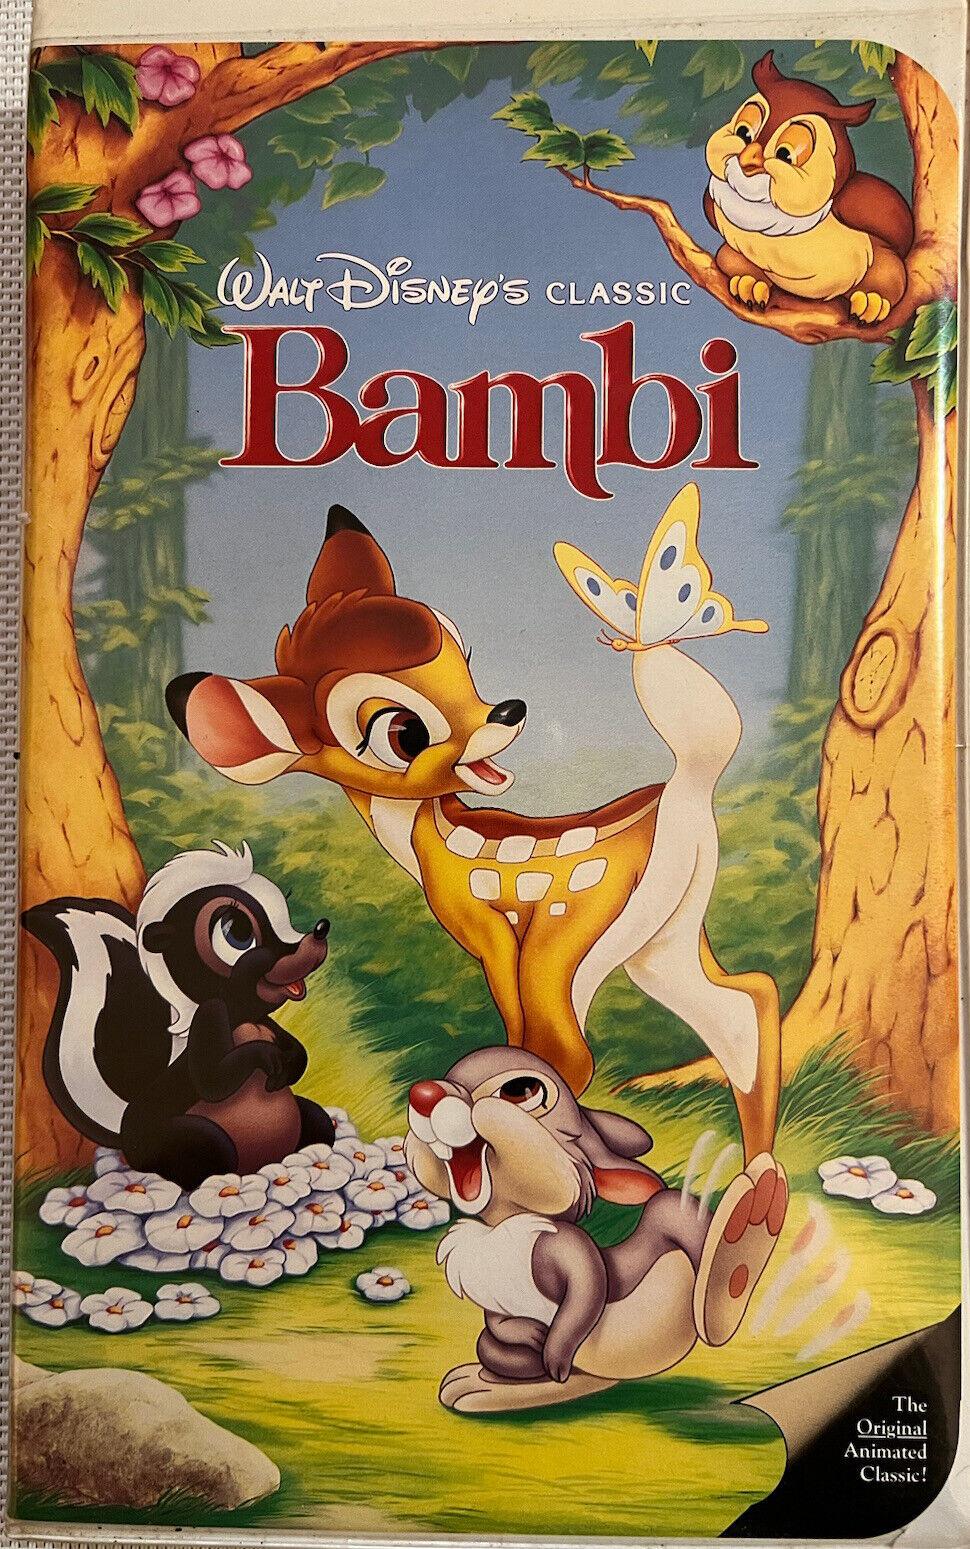 Bambi (Clamshell Case) - Darkside Records